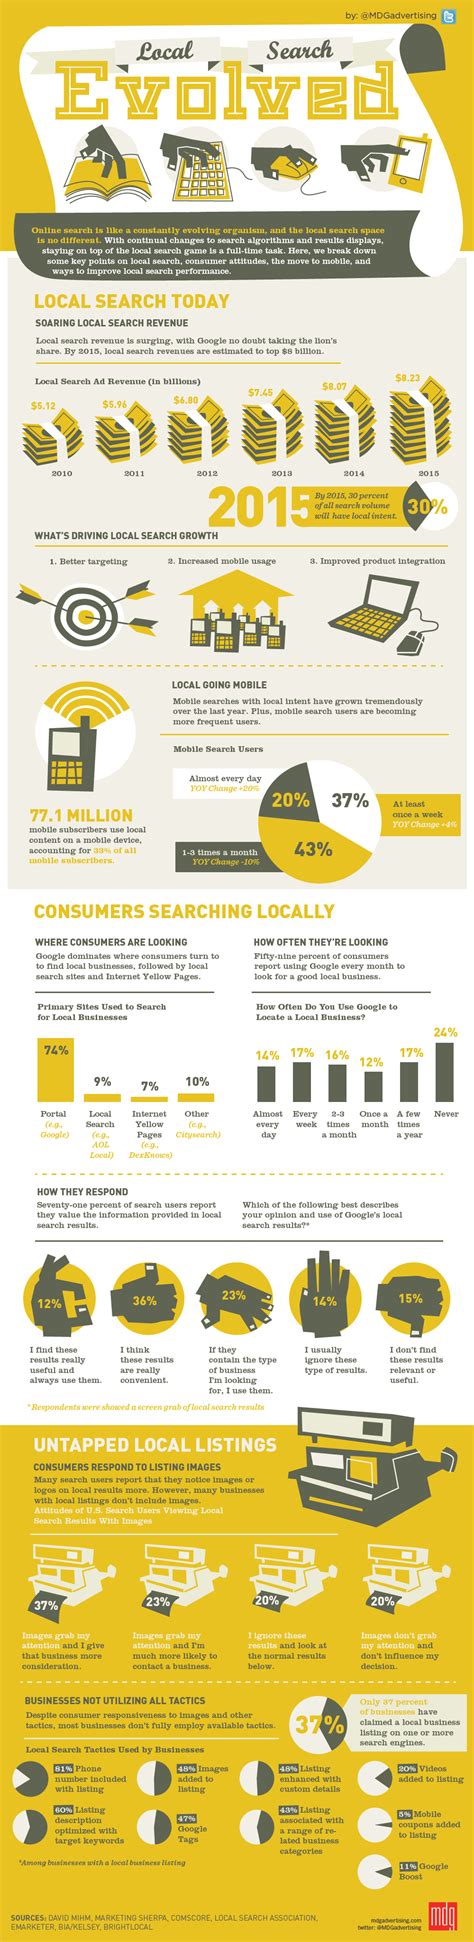 local search evolved infographic